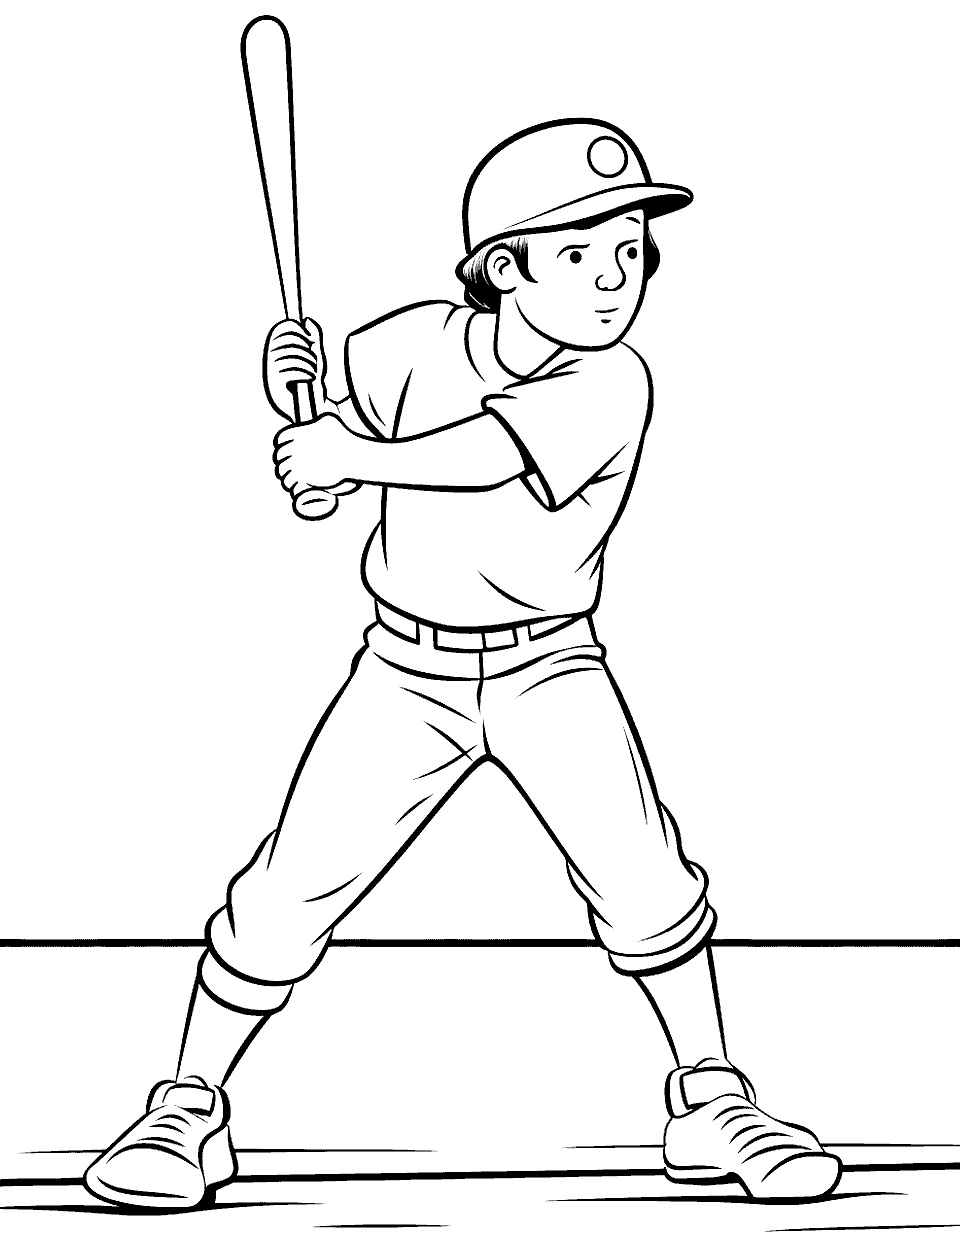 Baseball Player at Bat Coloring Page - A focused college baseball player in a batting stance.